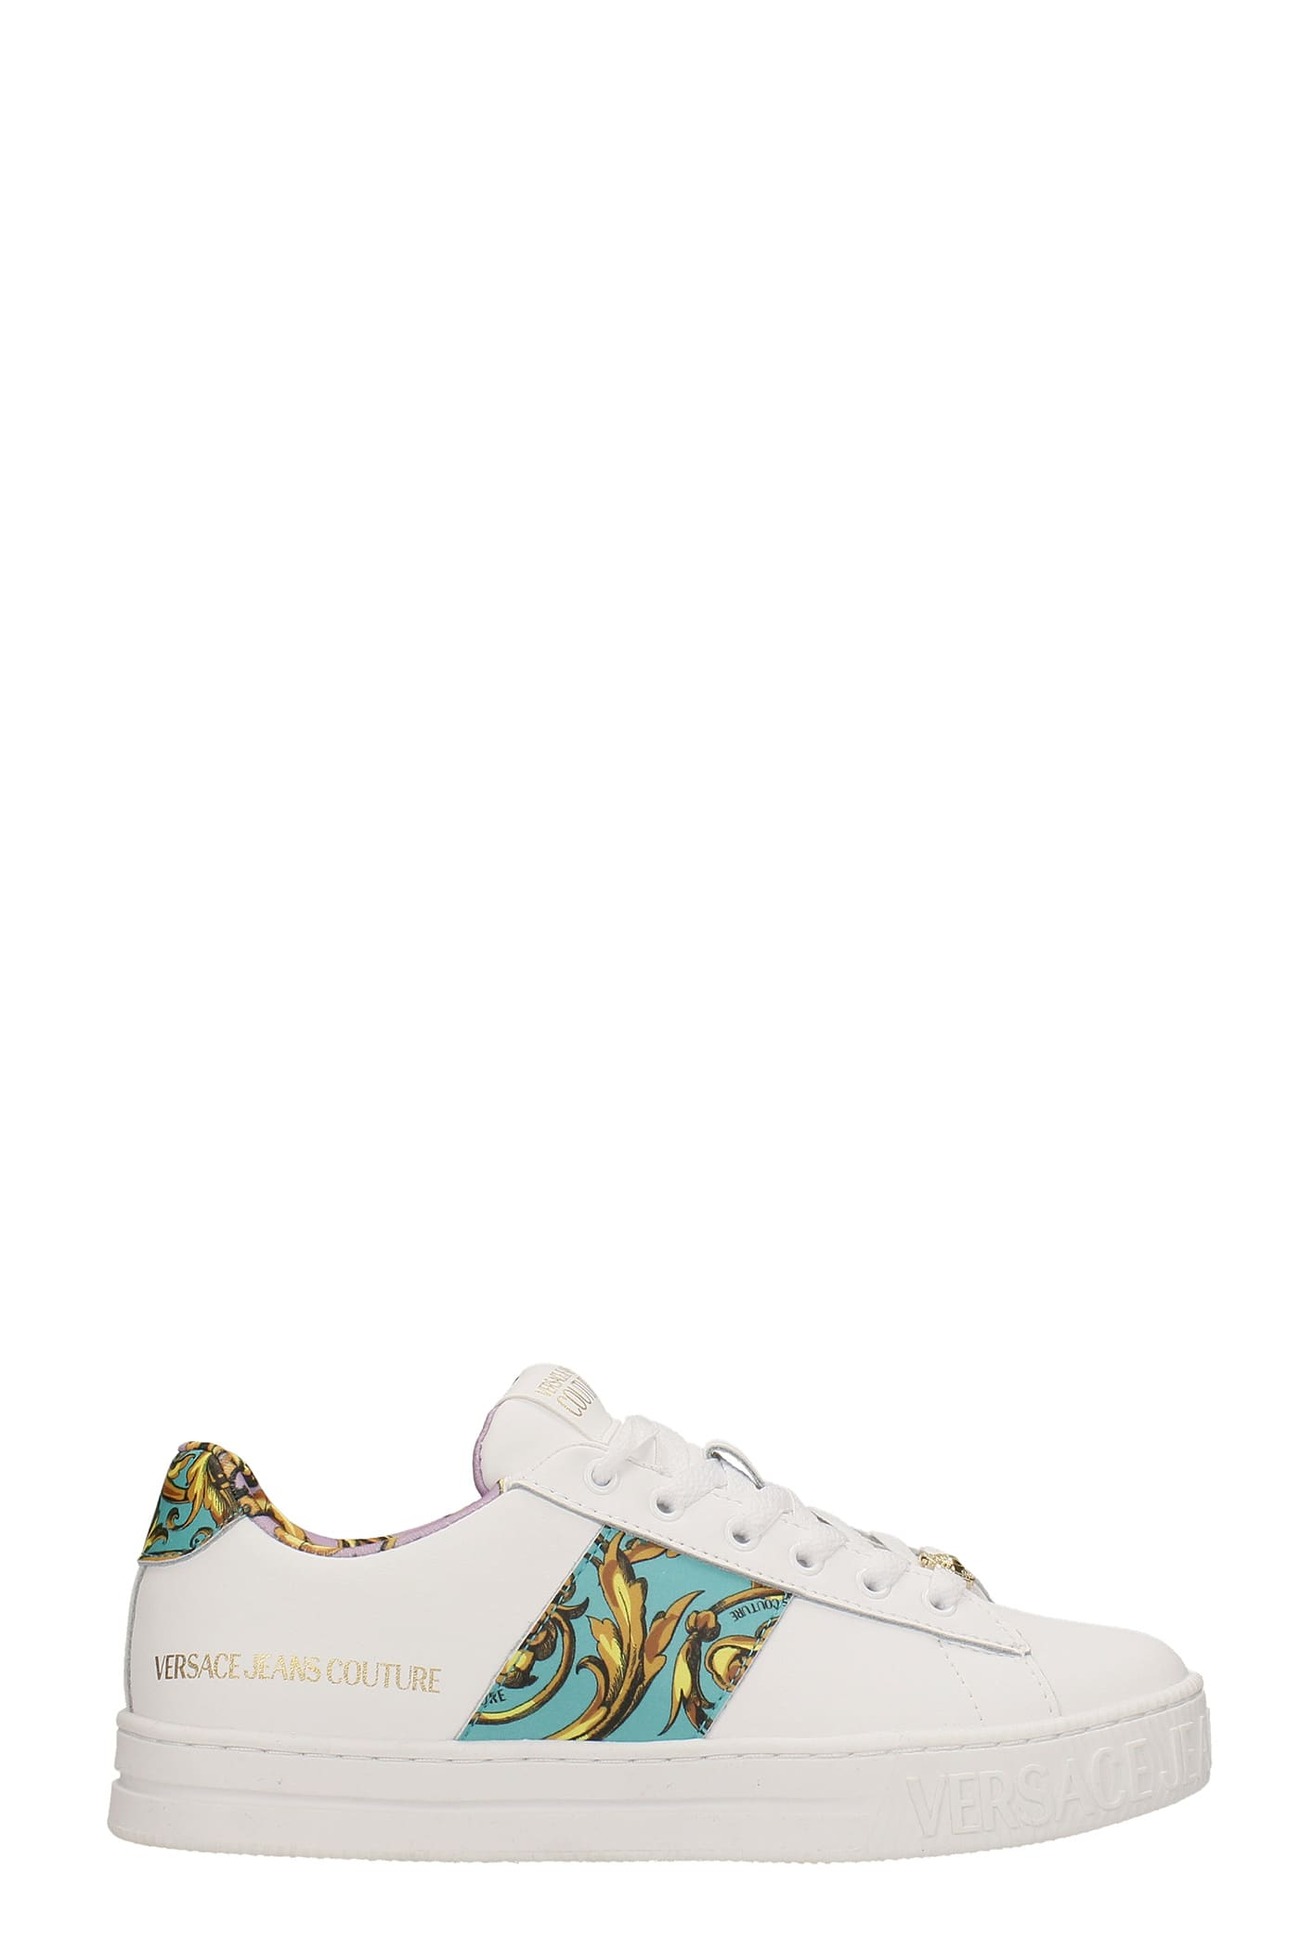 Versace Jeans Couture Sneakers In White Leather